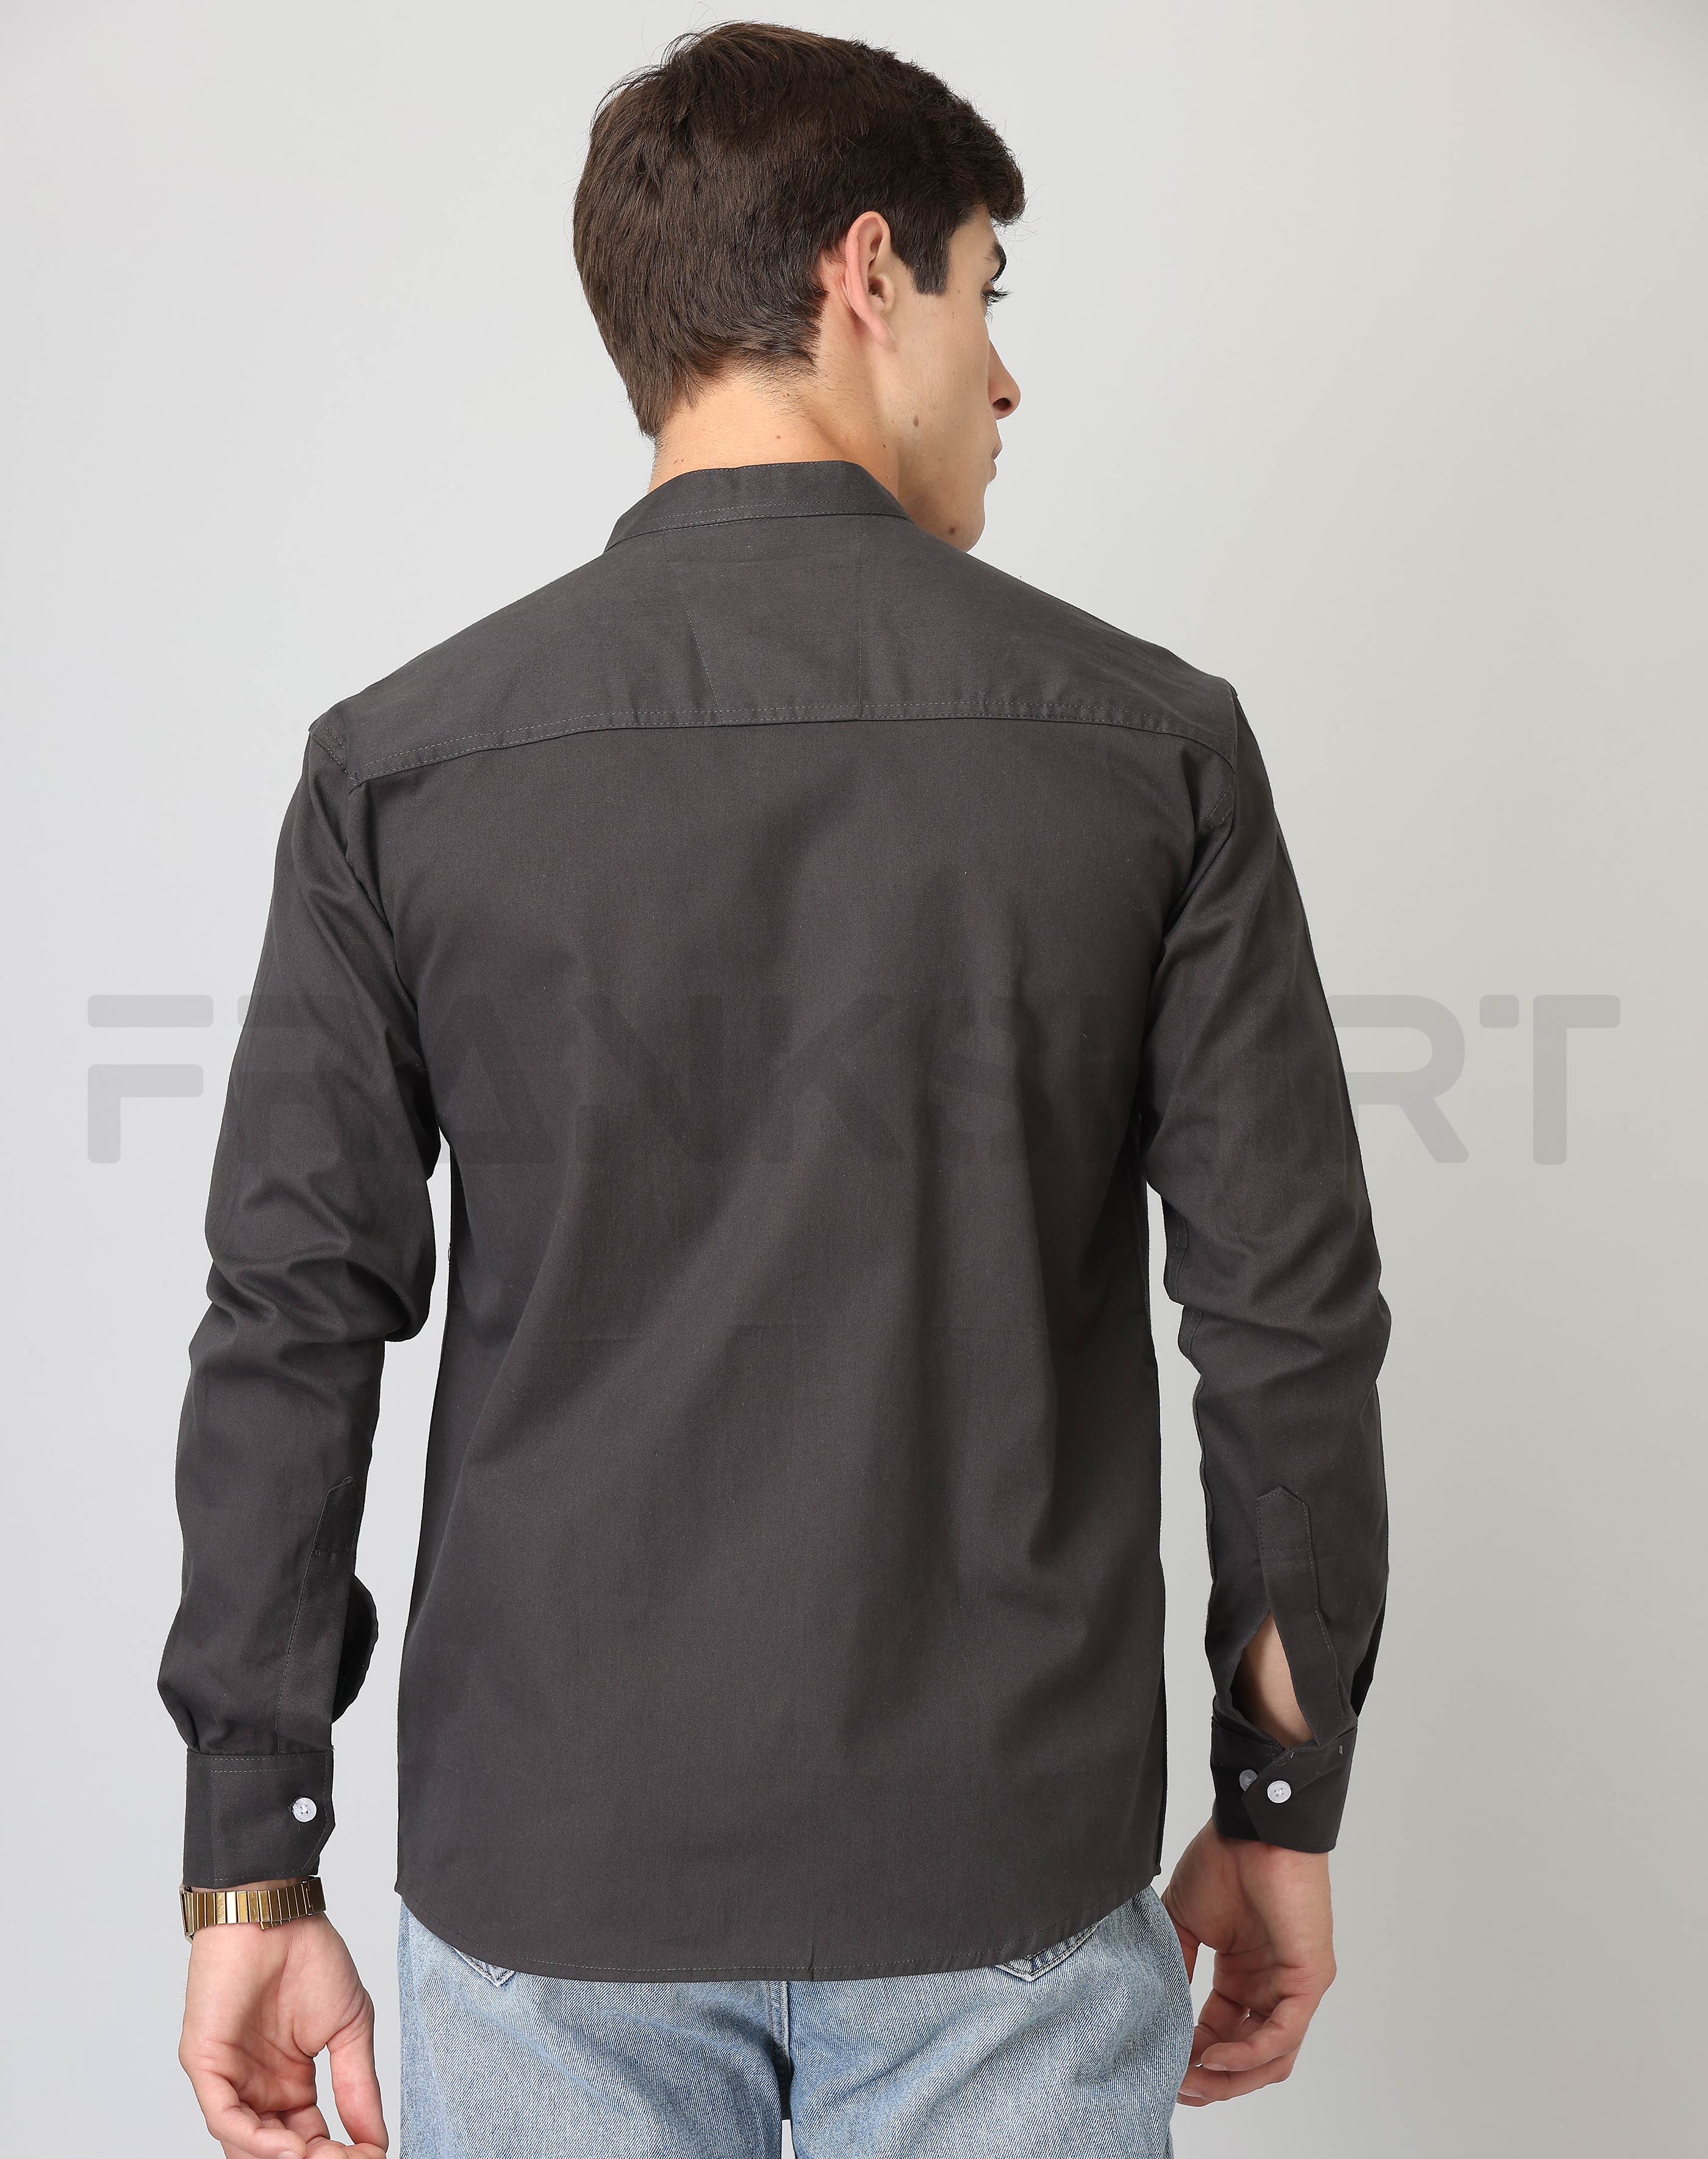 Frankshirt Chinese Collar Black Solid Tailored Fit Cotton Casual Shirt for Man